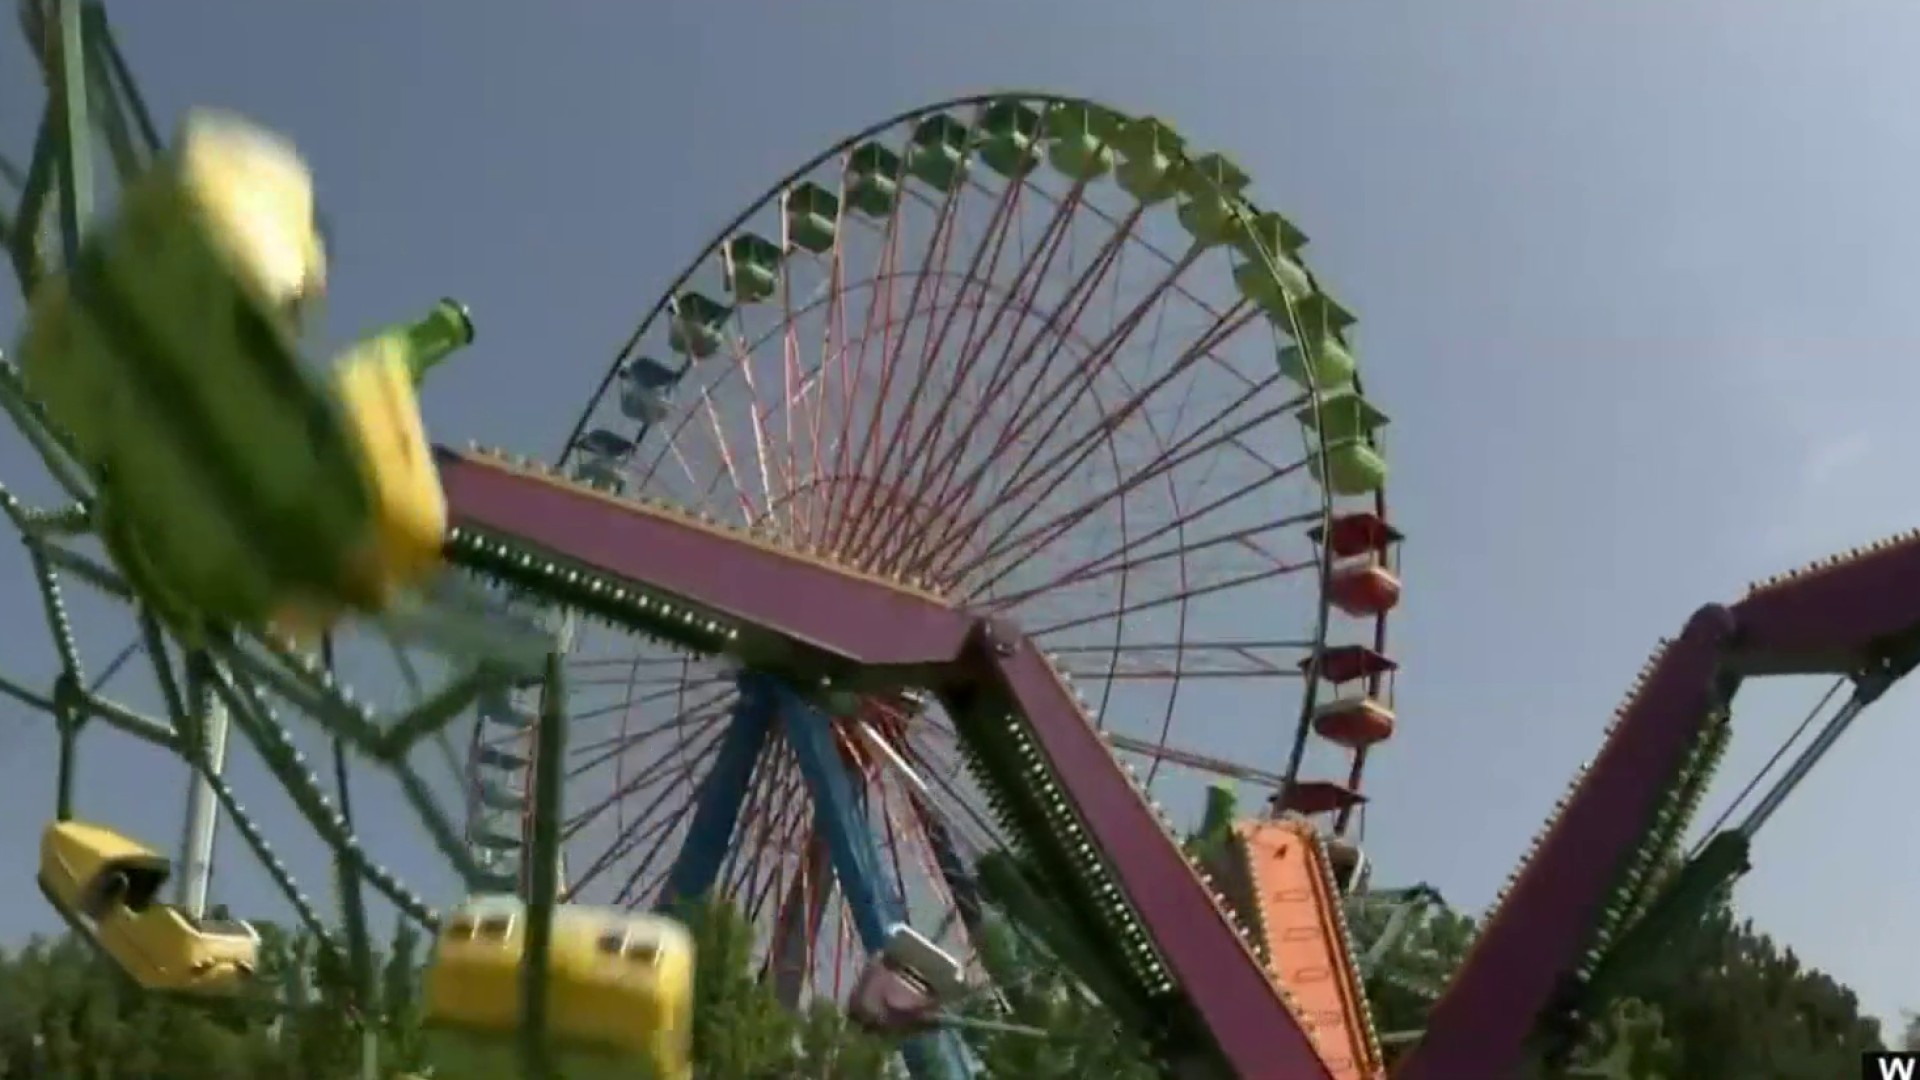 Couple accused of having sex in front of kids while riding ferris wheel at Cedar Point in Ohio pic